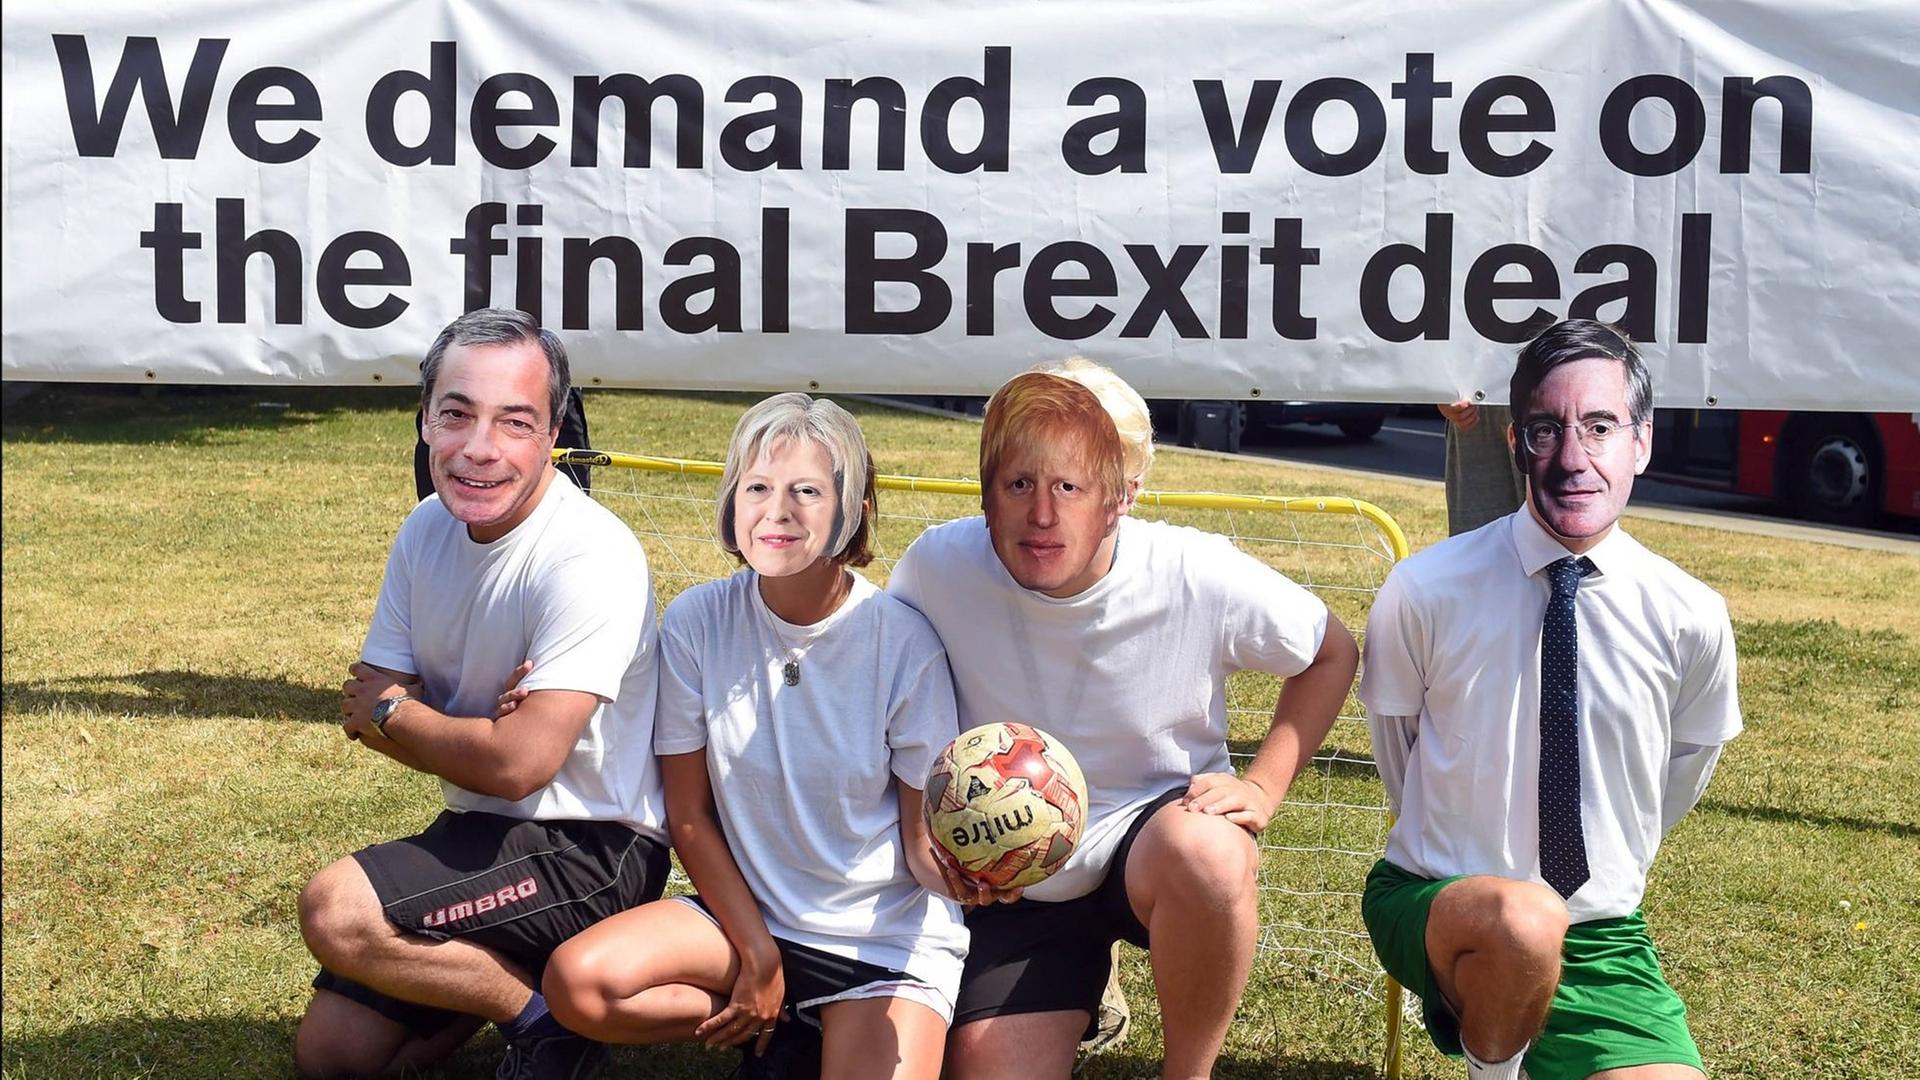 . 28/06/2018. London, United Kingdom. The People s Vote campaign hold a World Cup event on College Green to highlight what they claim is the shambolic state of Brexit on the day the EU Council meets for crunch talks. Activists from the People s Vote campaign play football on College Green dressed as Brexiters including Boris Johnson, Jacob Rees-Mogg, Nigel Farage and Theresa May. PUBLICATIONxINxGERxSUIxAUTxHUNxONLY xPetexMaclainex/xi-Imagesx IIM-18071-0024